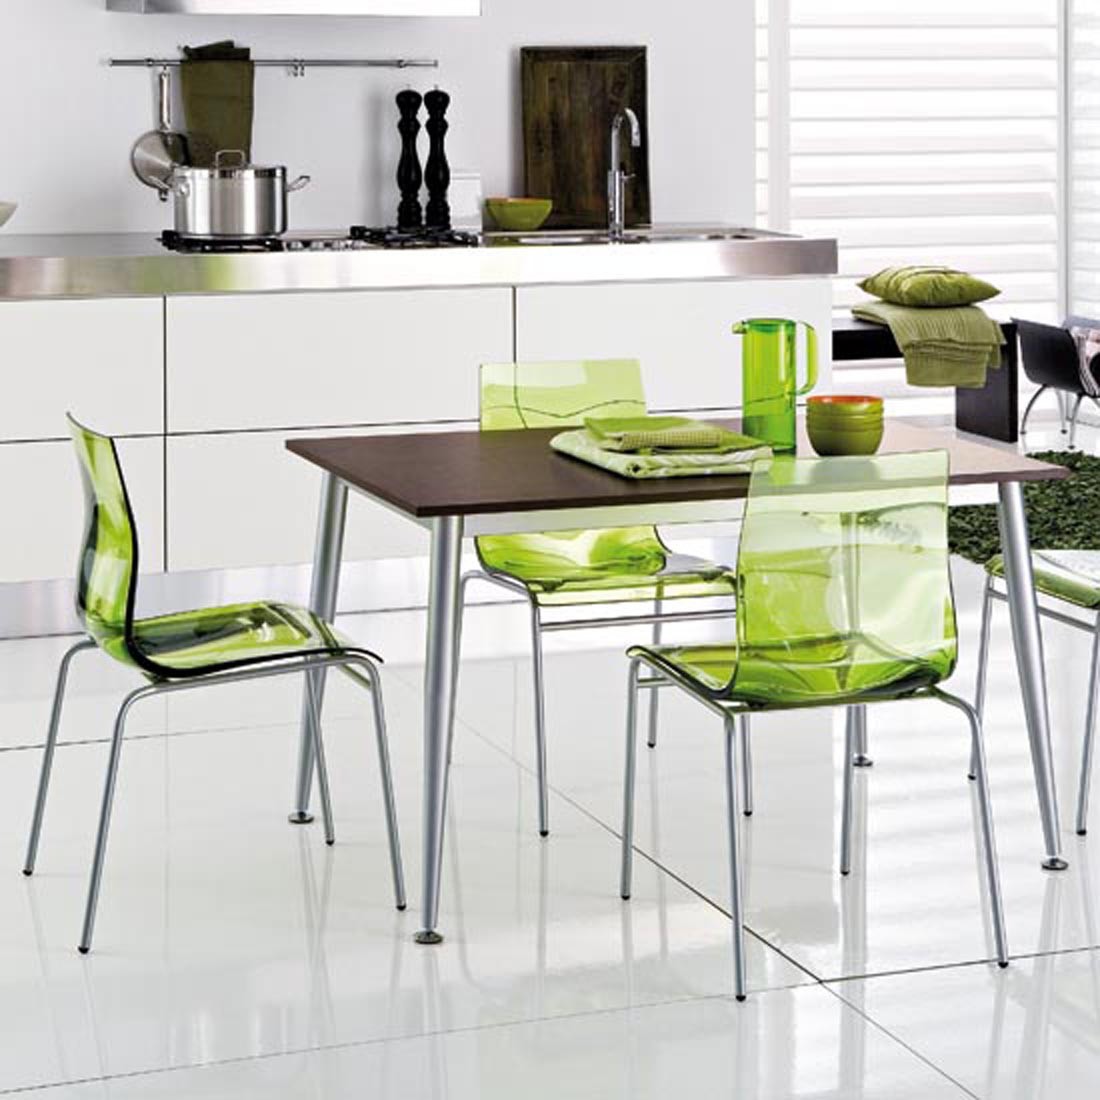 These clear acrylic green chairs look quite snazzy